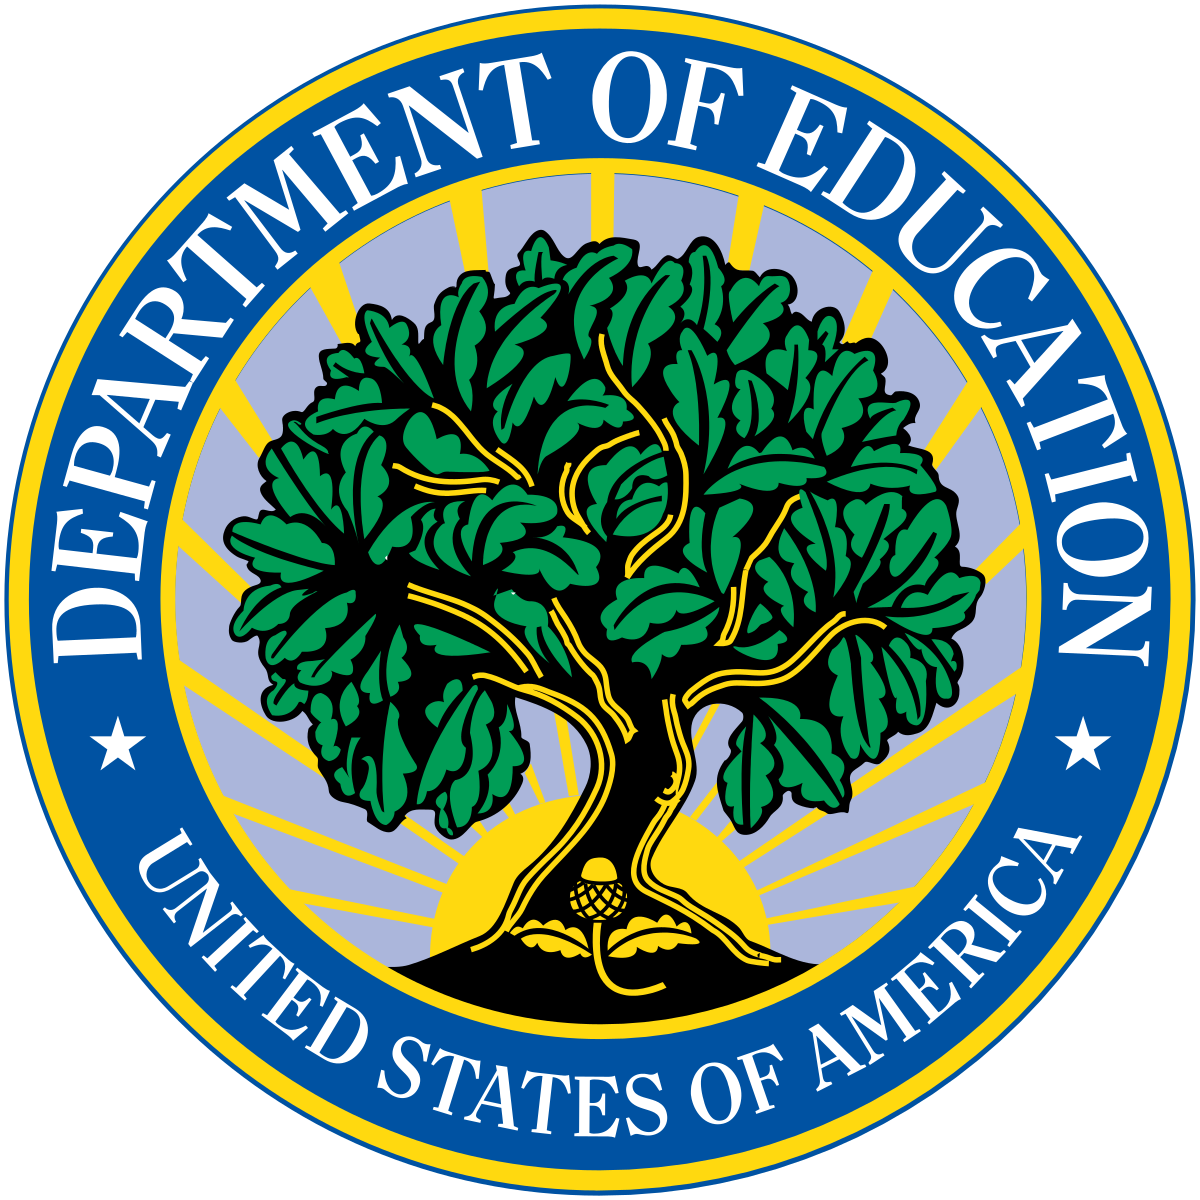 Seal of the United States Department of Education, color